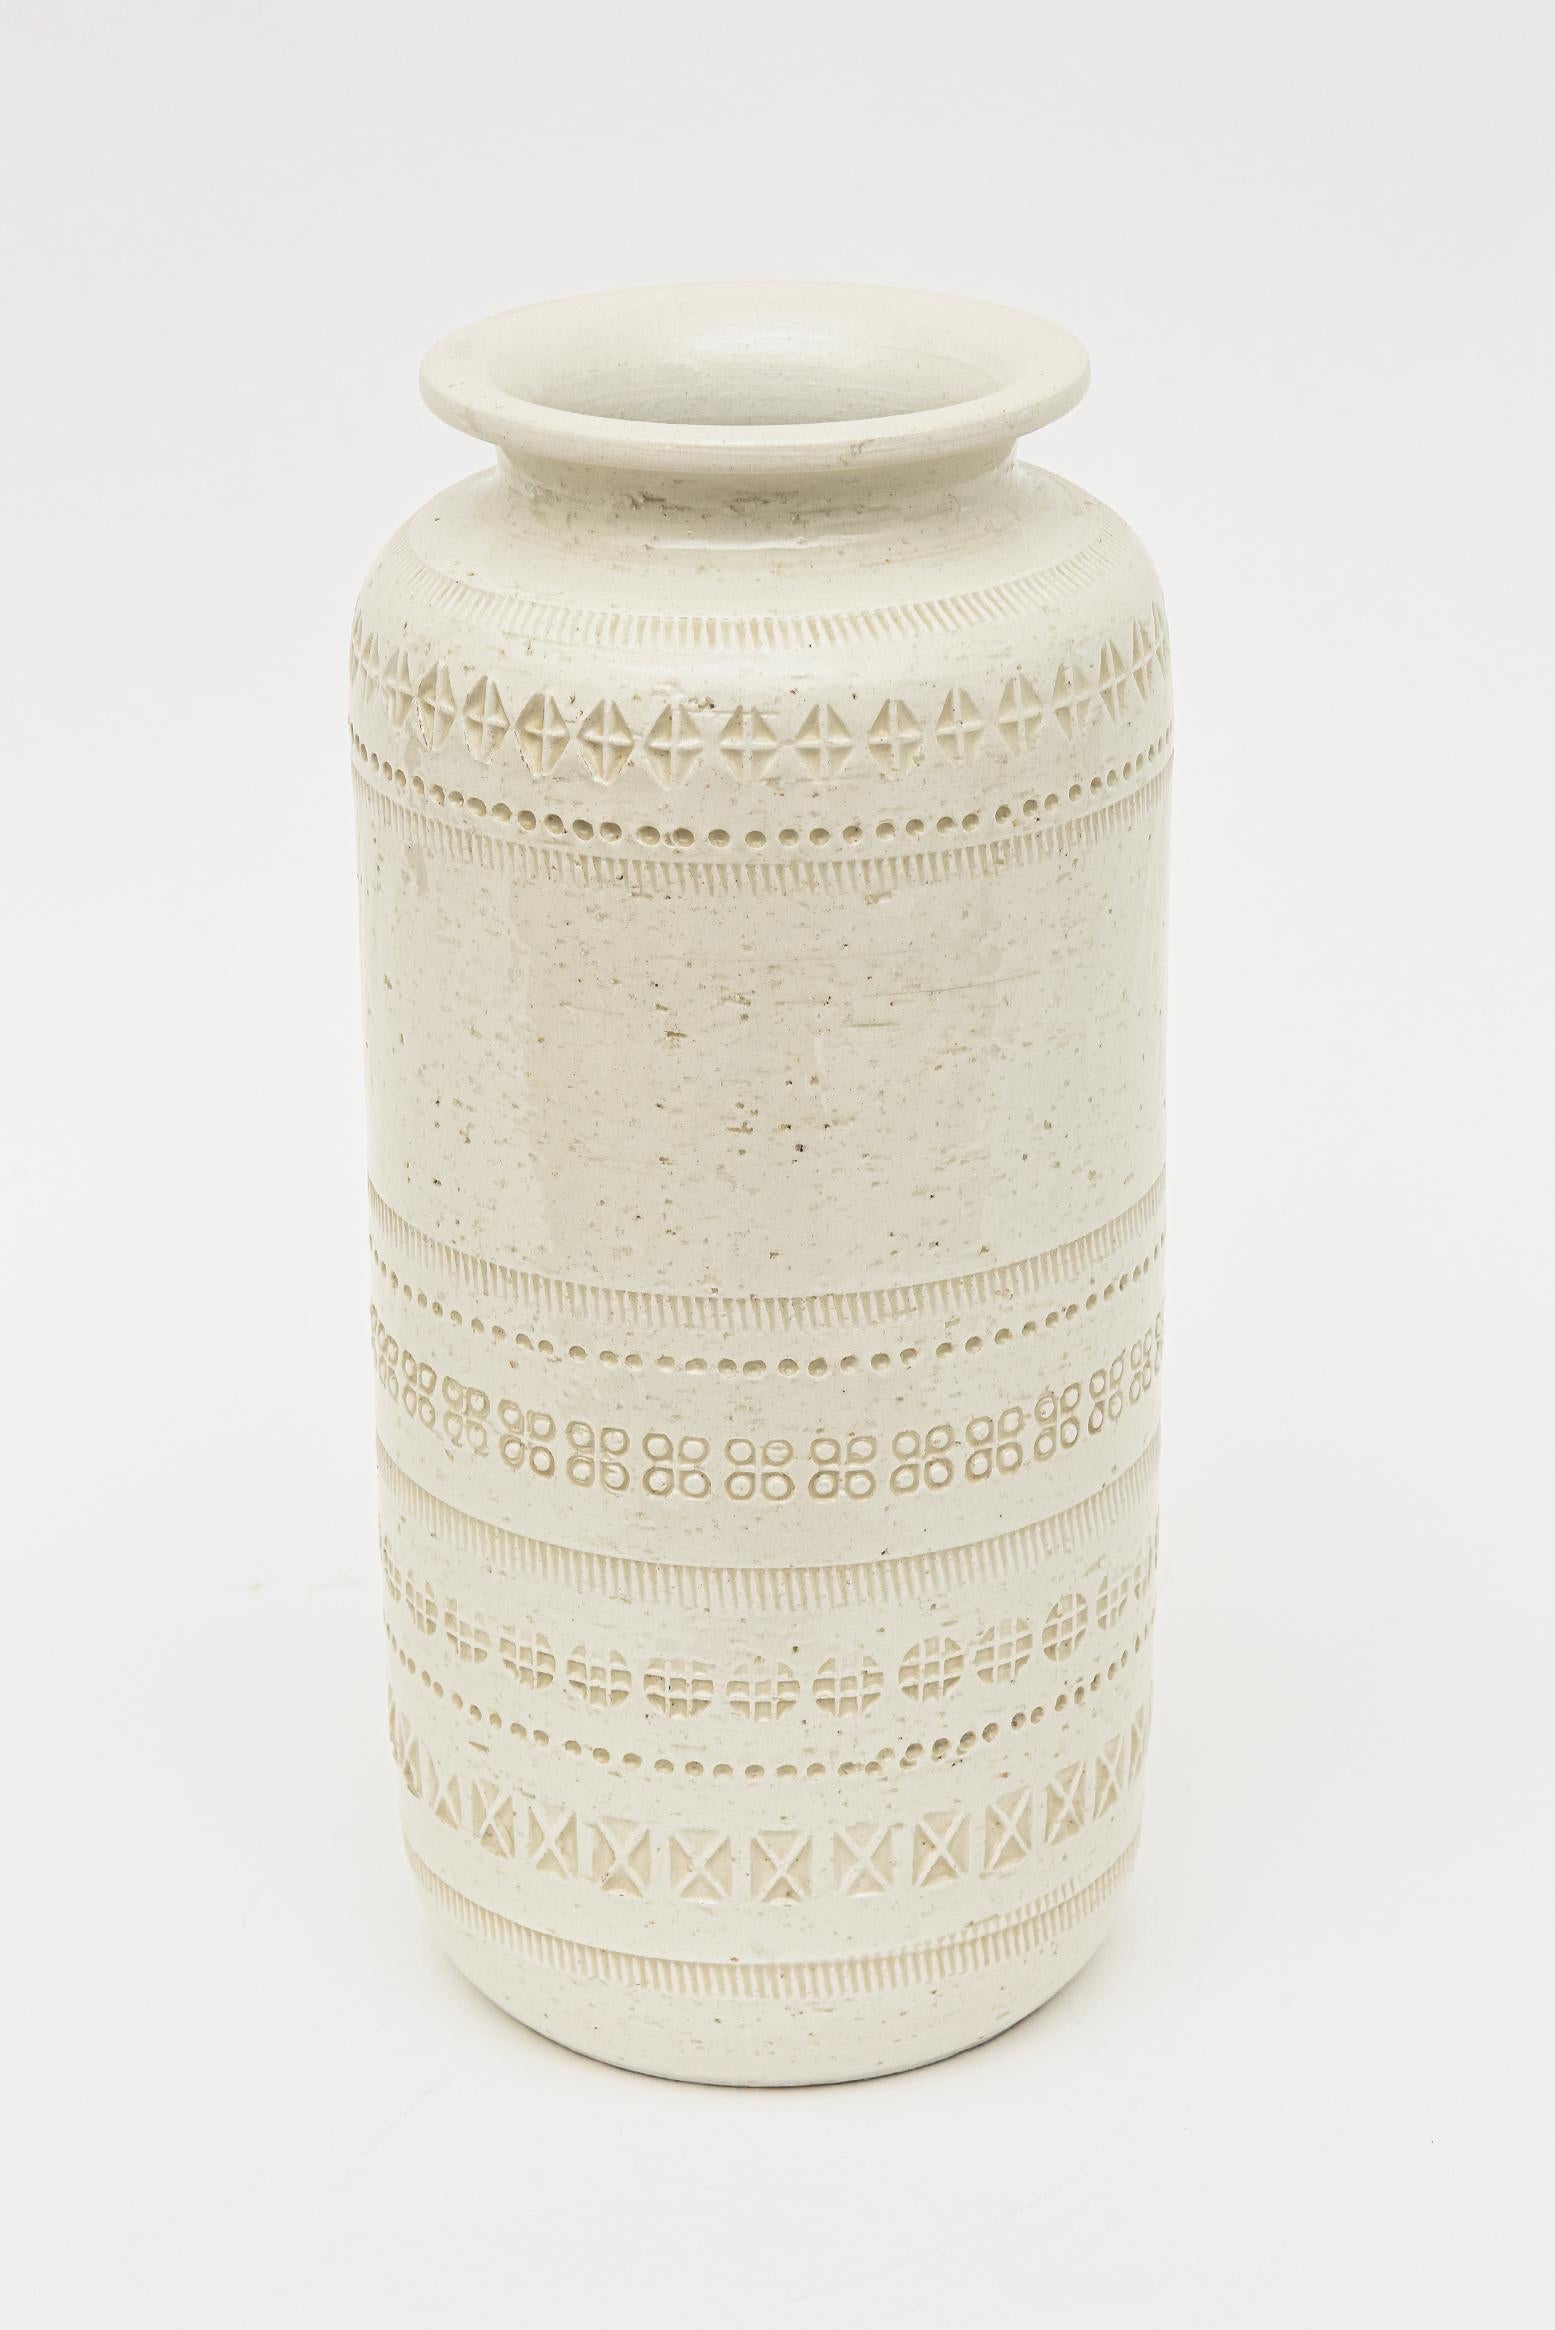 This vintage off white incised textural hallmarked vase or vessel is signed on the bottom Flavia Montelupo Italy and was the sister company of Bitossi all under the parent corporation of Gruppo Colorobbia headquatered in Montelupo, Fiorentino Italy.